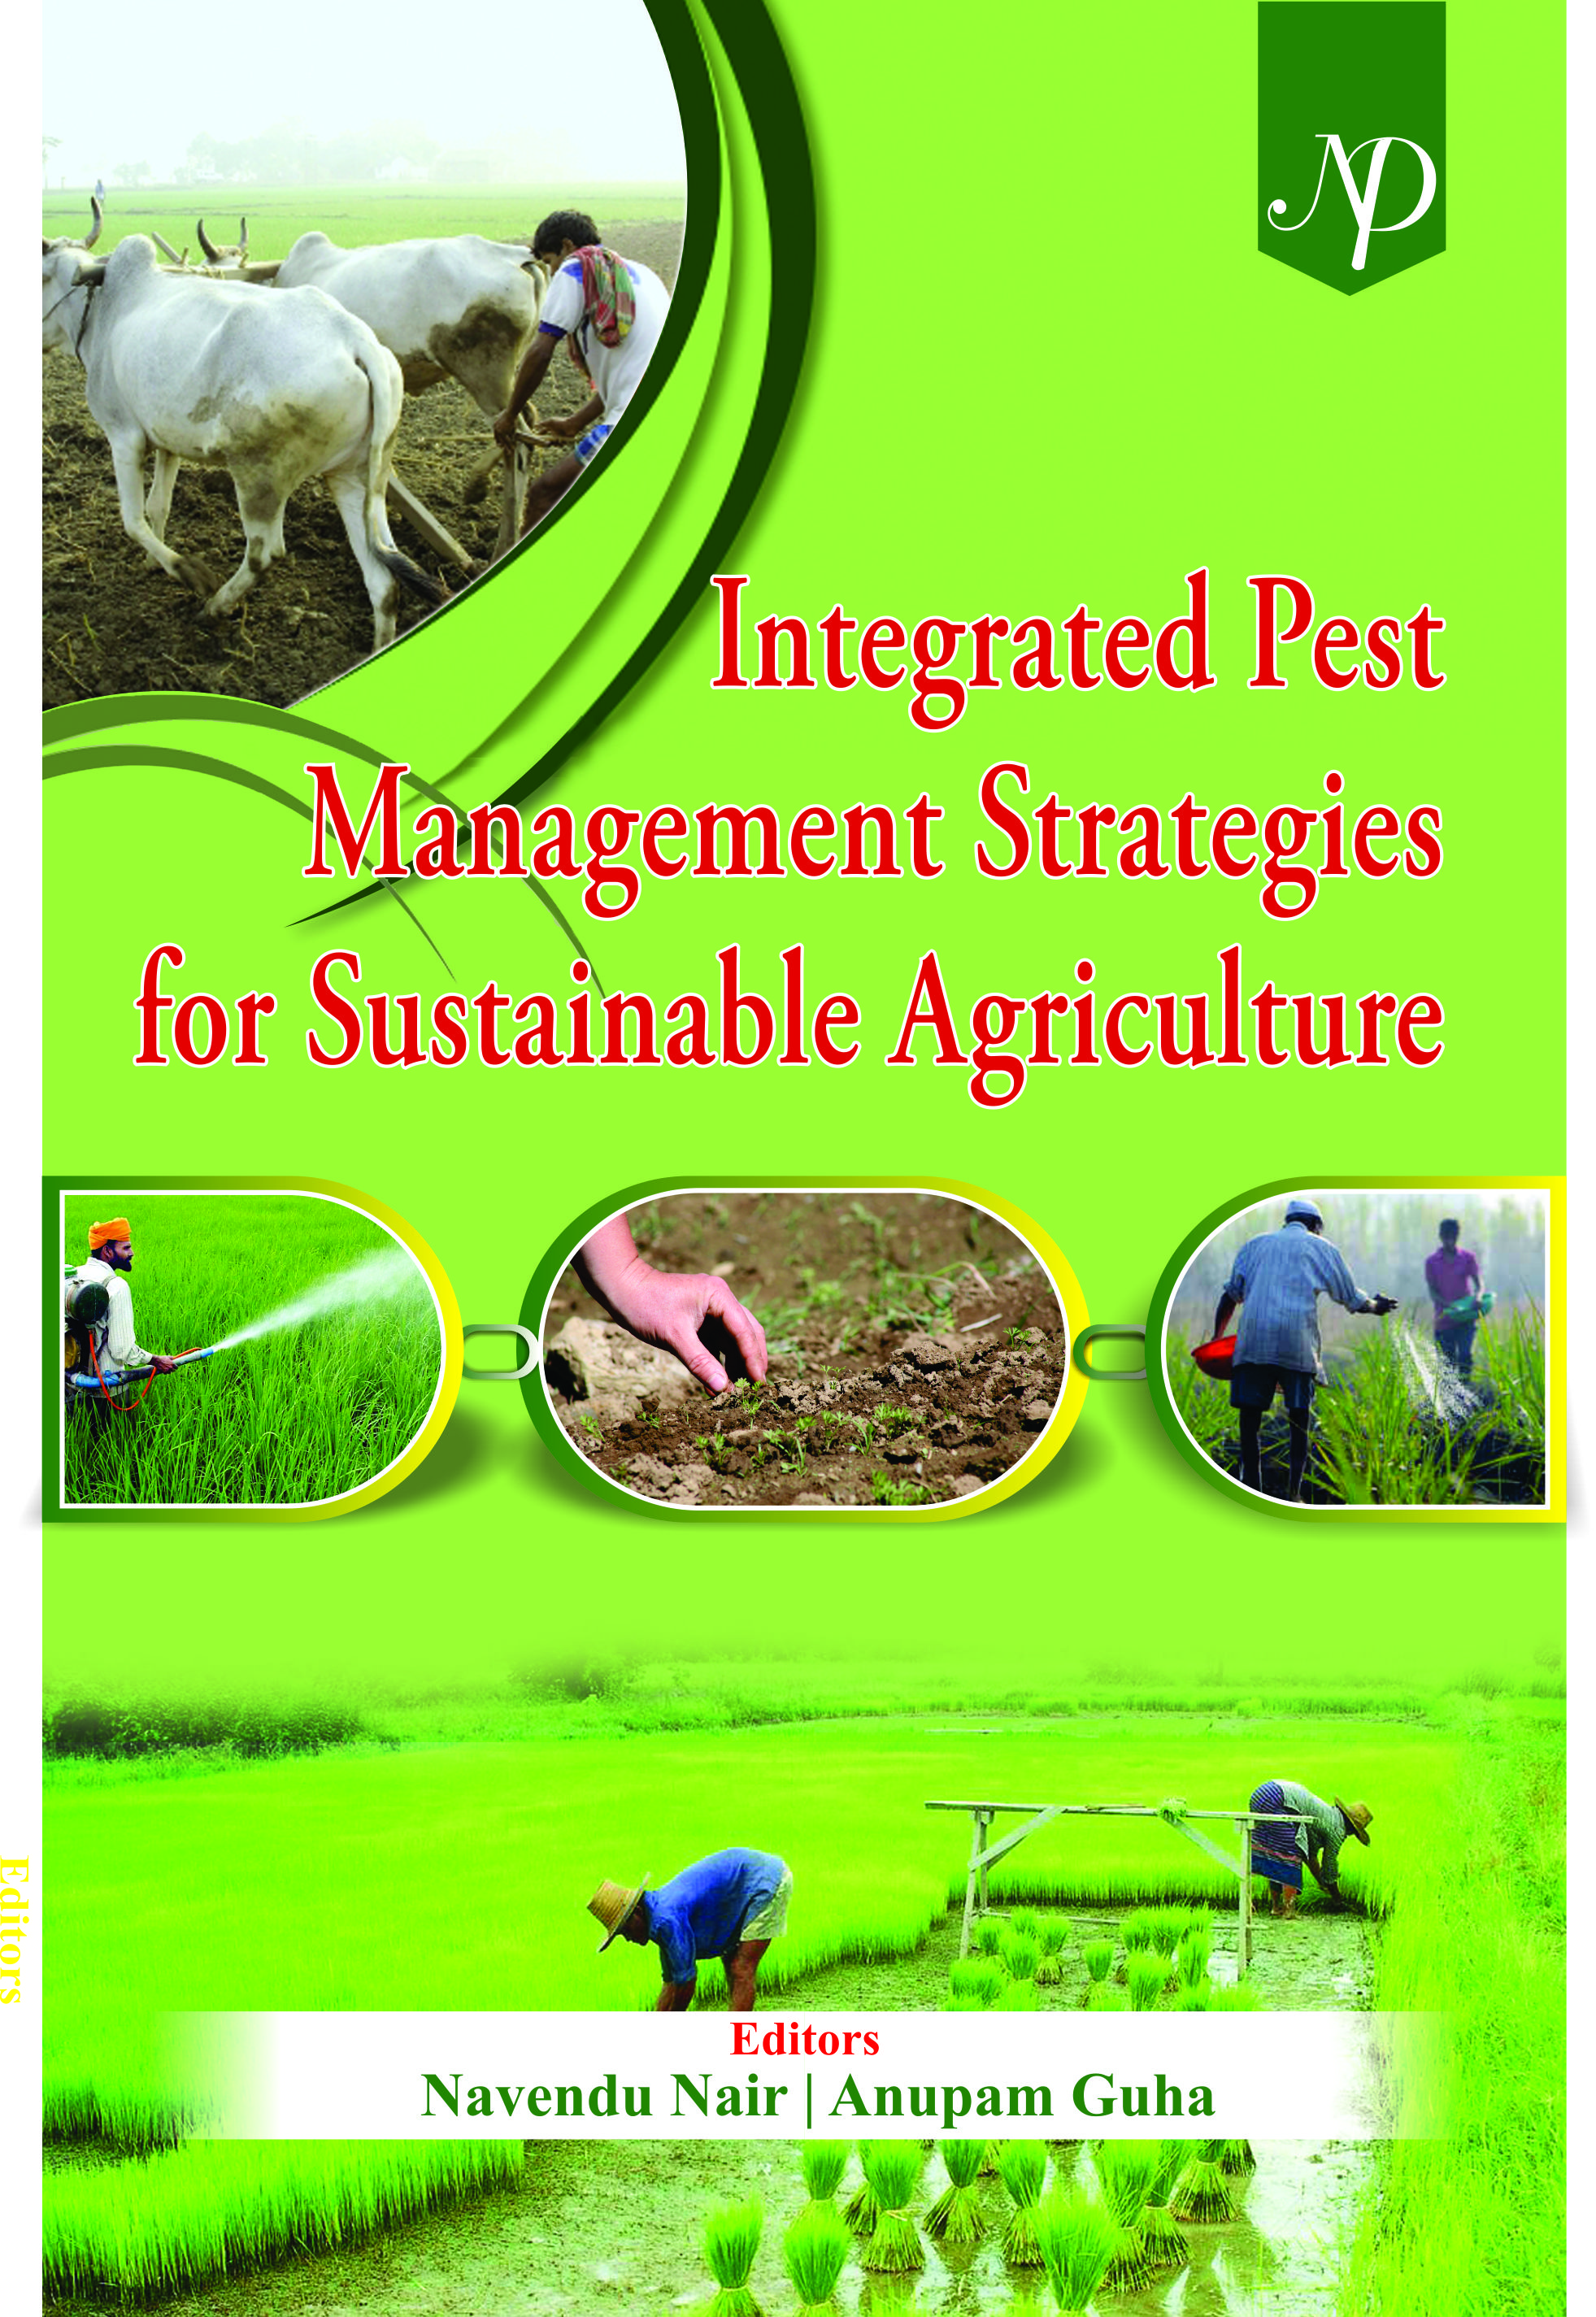 Integrated Pest Management Strategies for Sustainable Agriculture Cover.jpg